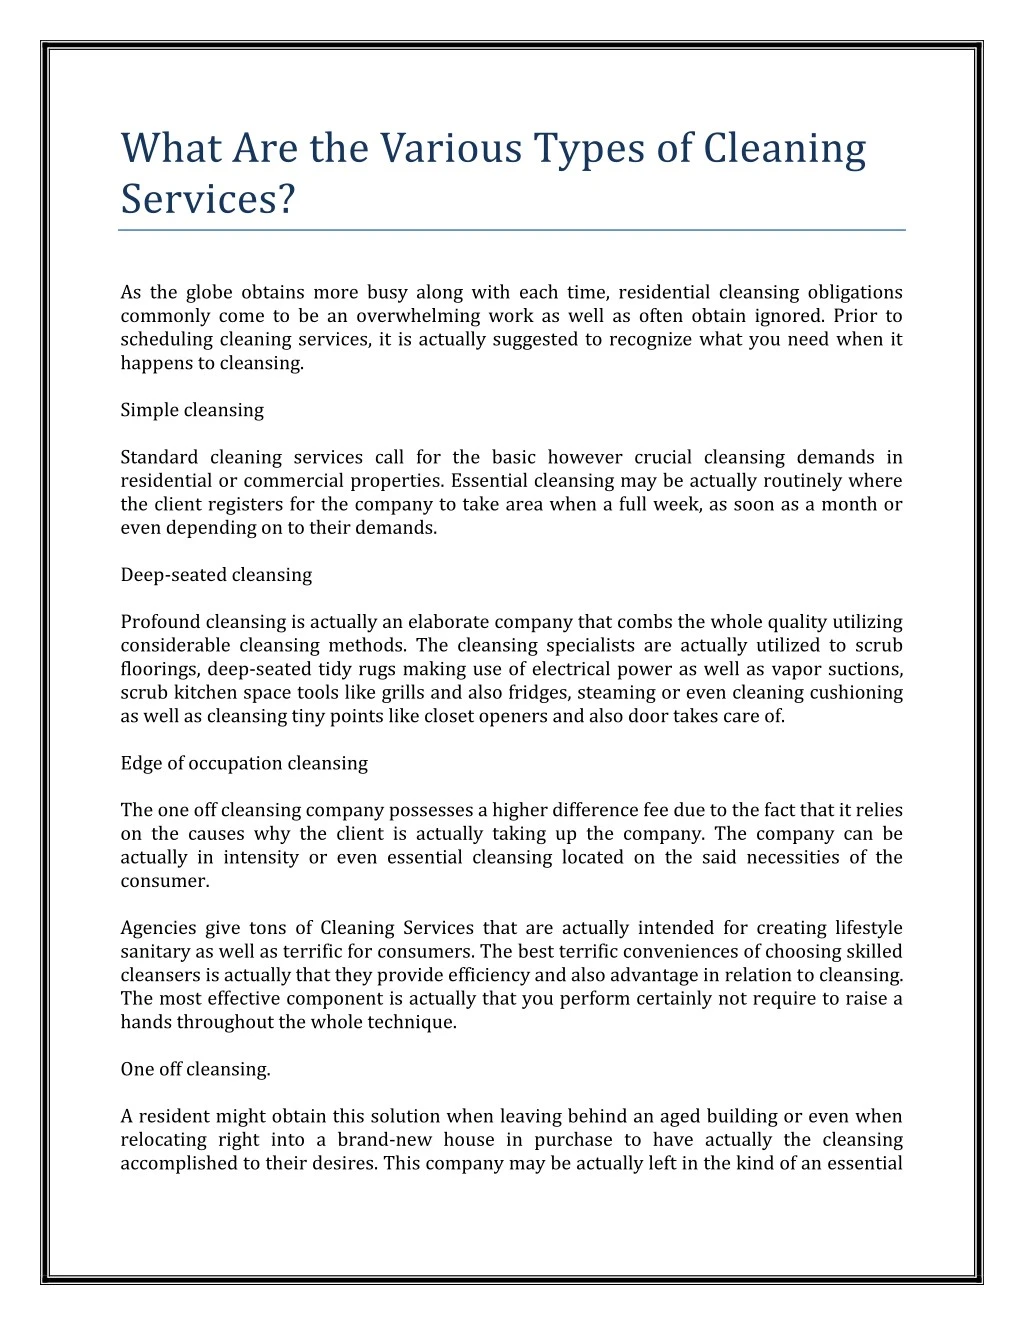 what are the various types of cleaning services